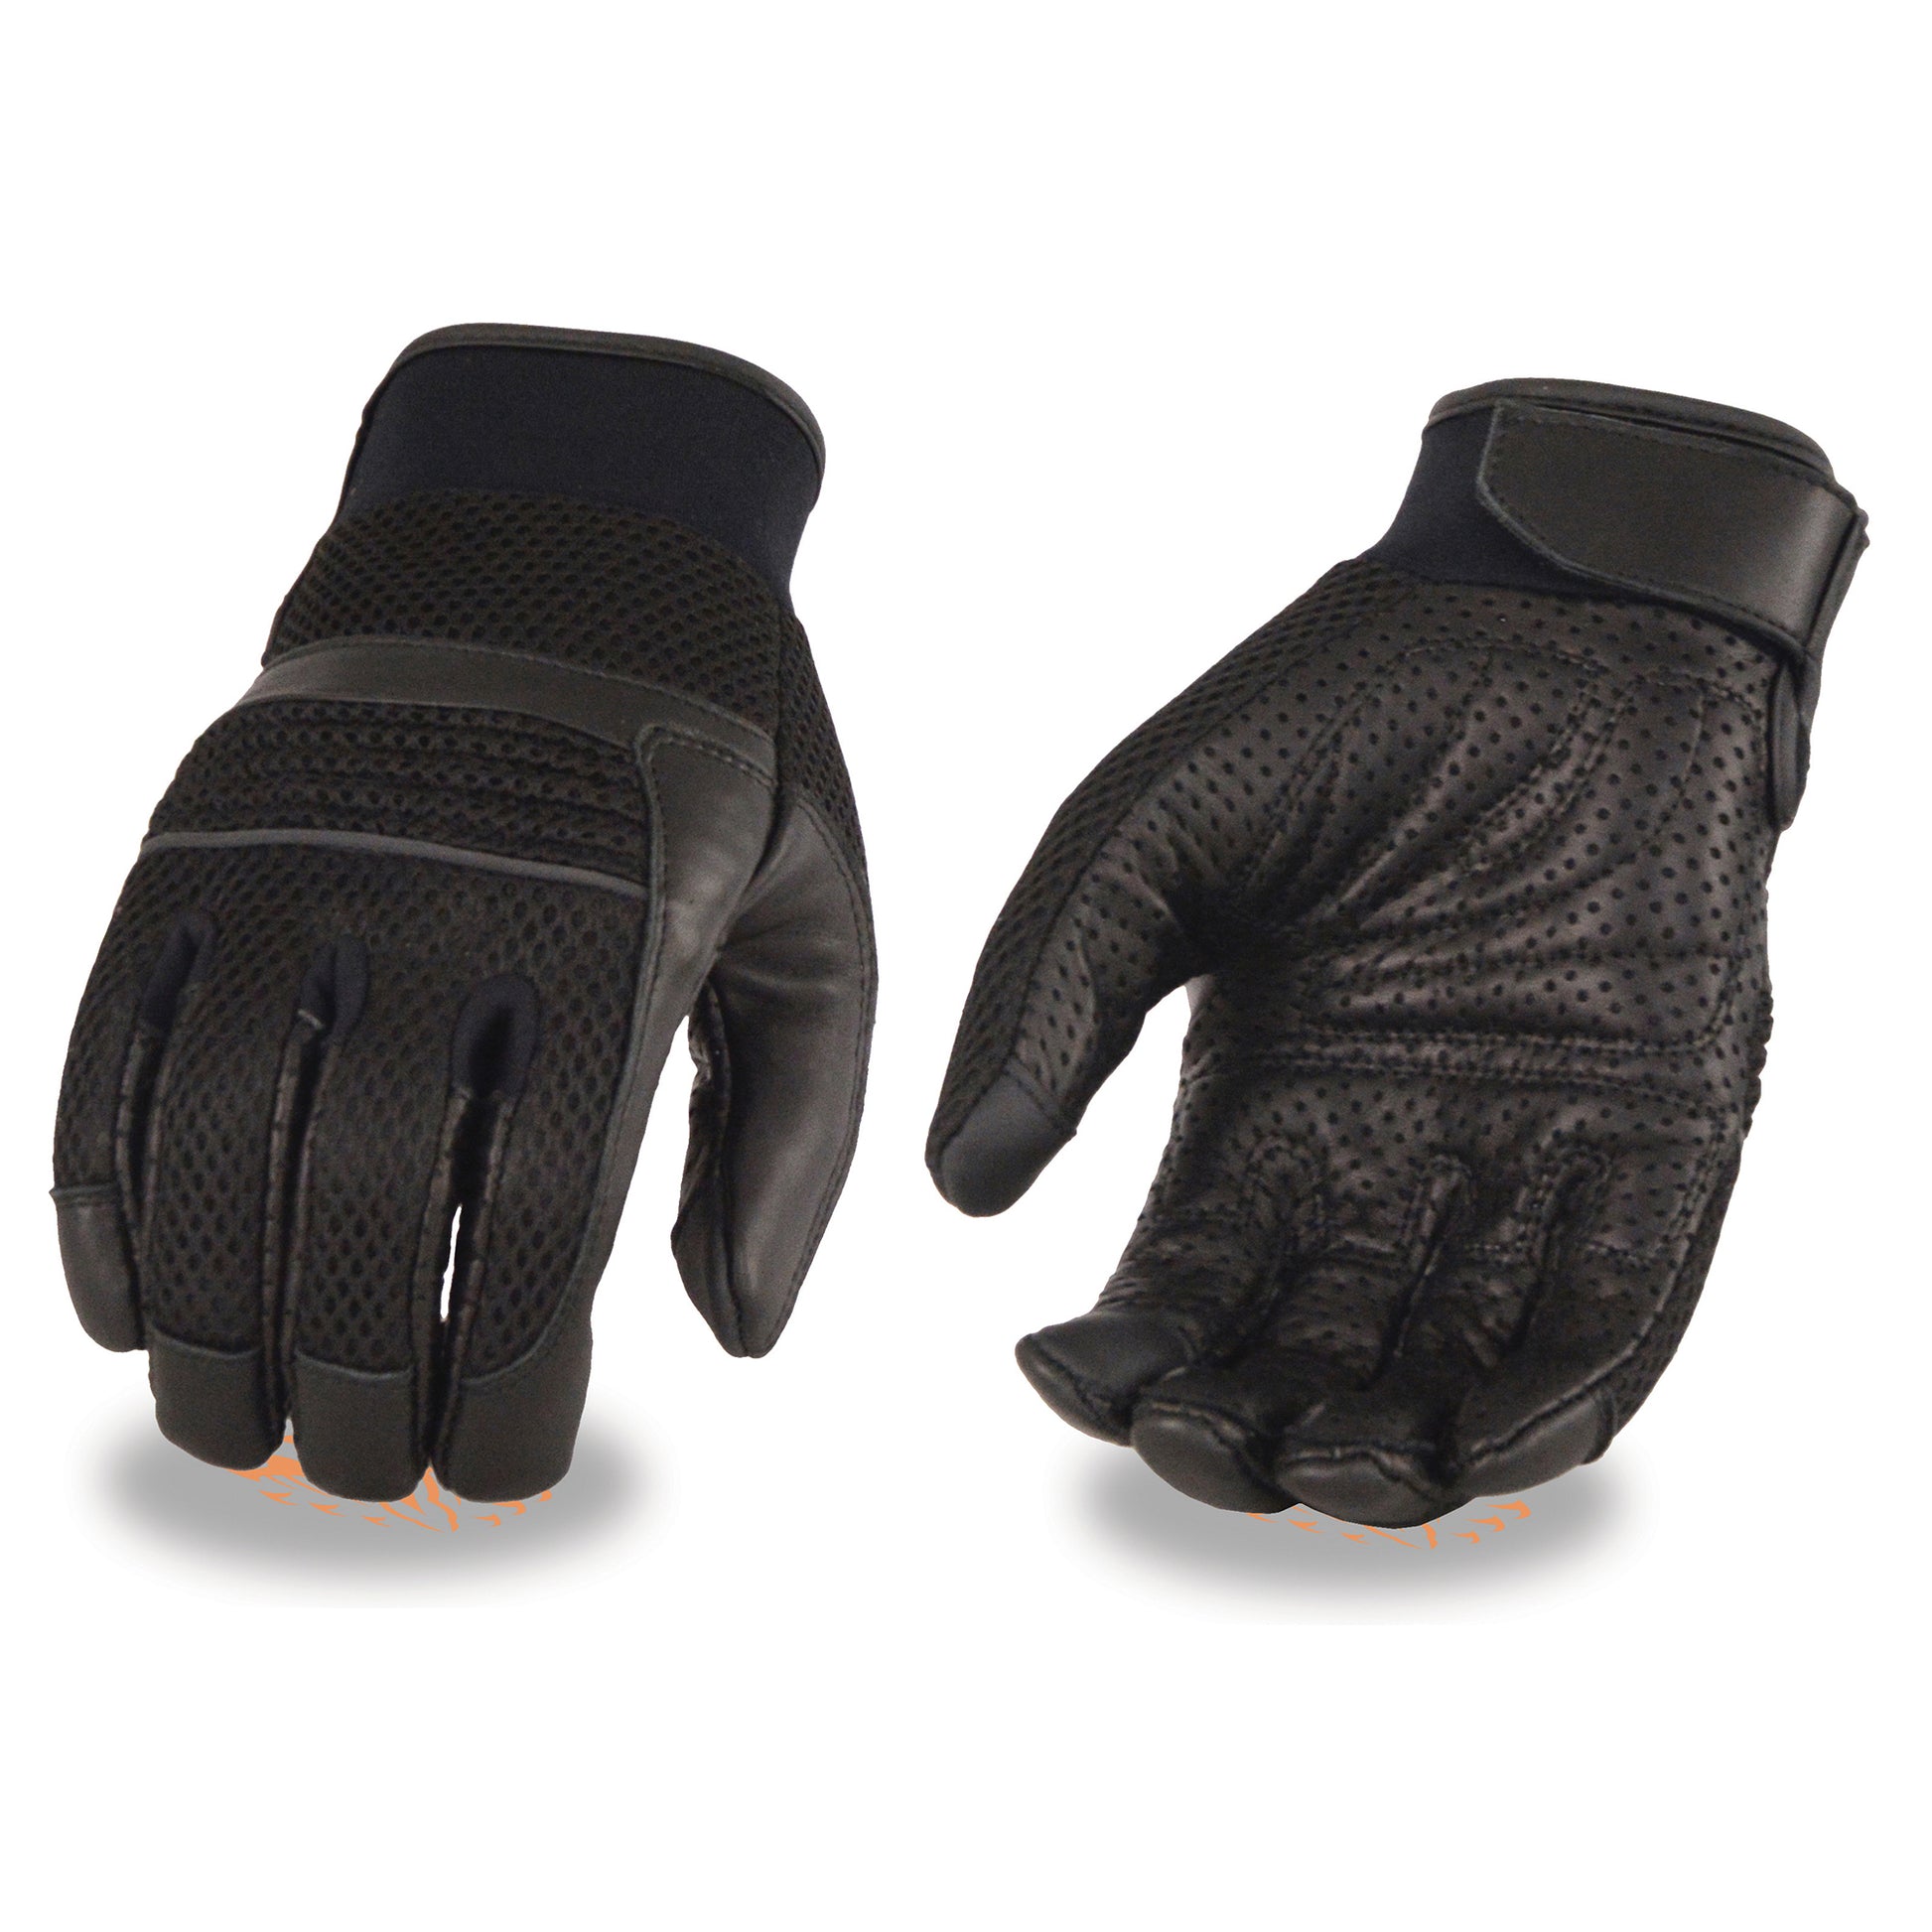 Men's Leather & Mesh Racing Gloves with Gel Palm, Reflective PipingTouch Screen Fingers